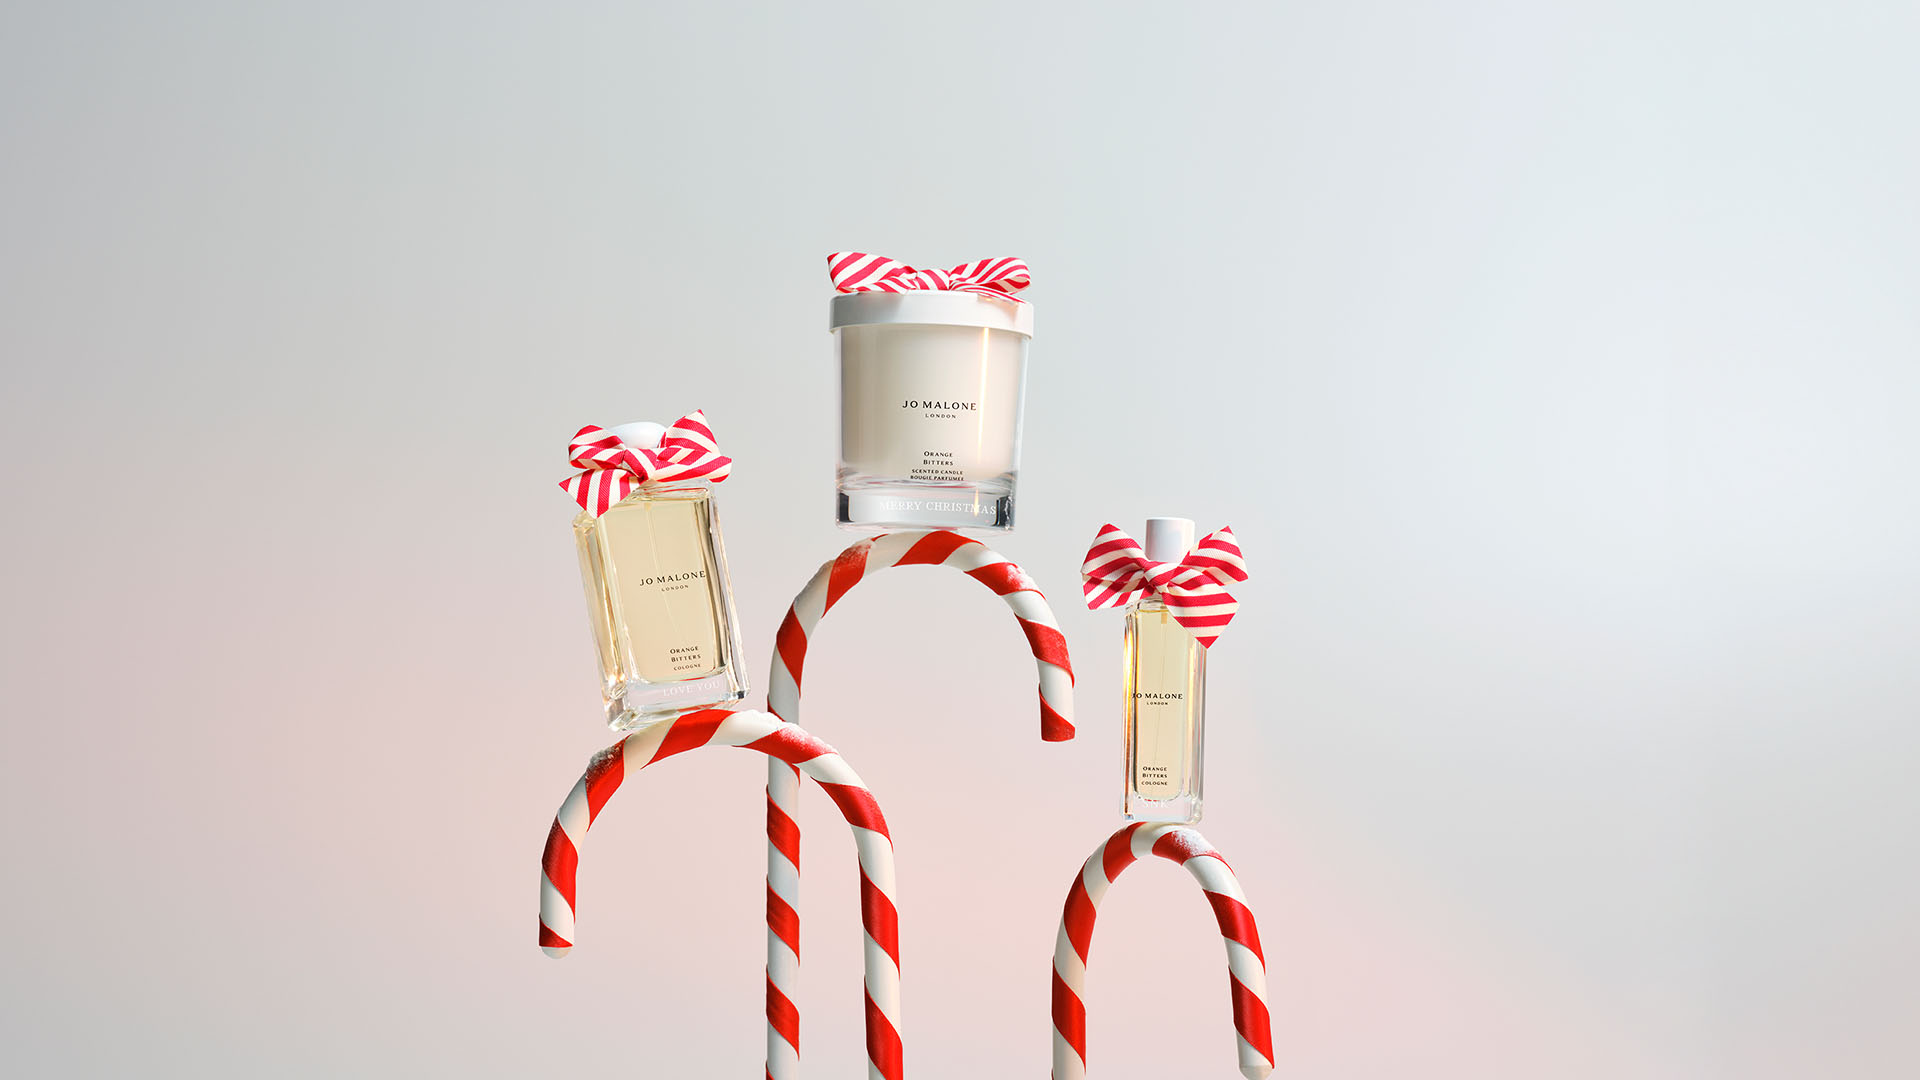 Jo Malone London Gingerbread House Candy Canes and boys running with gifts and ribbon